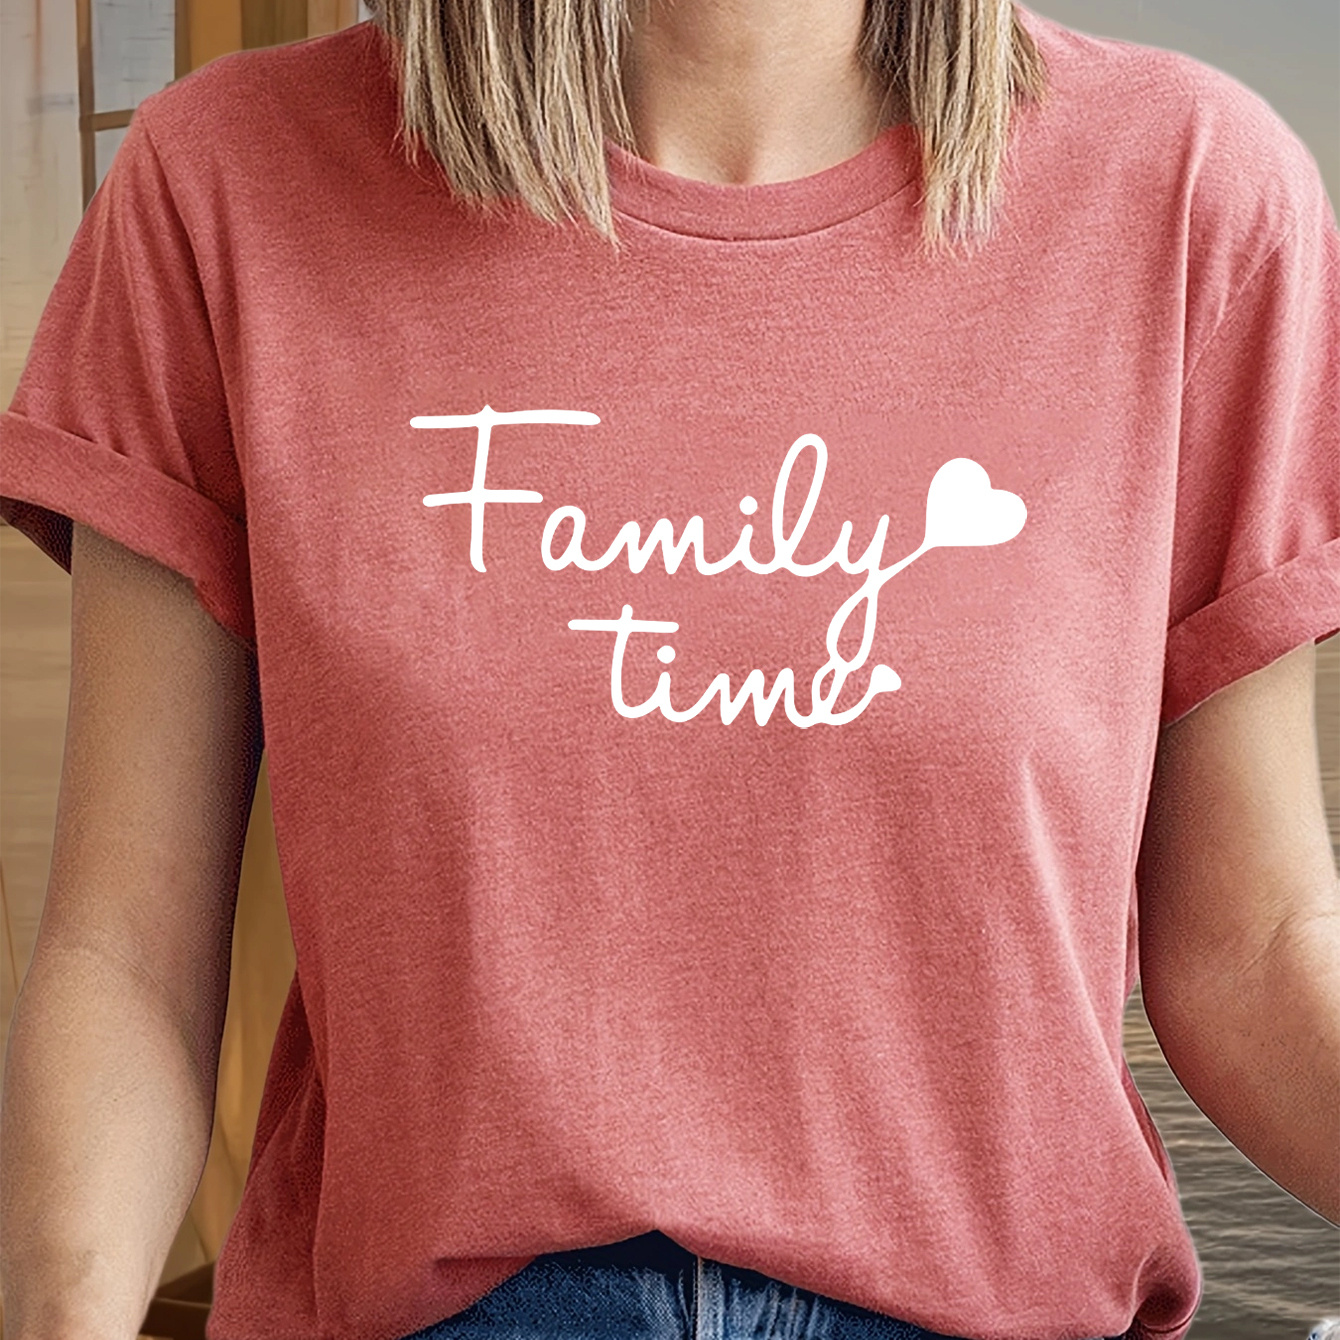 

Family Time Print T-shirt, Short Sleeve Crew Neck Casual Top For Summer And Spring, Women's Clothing